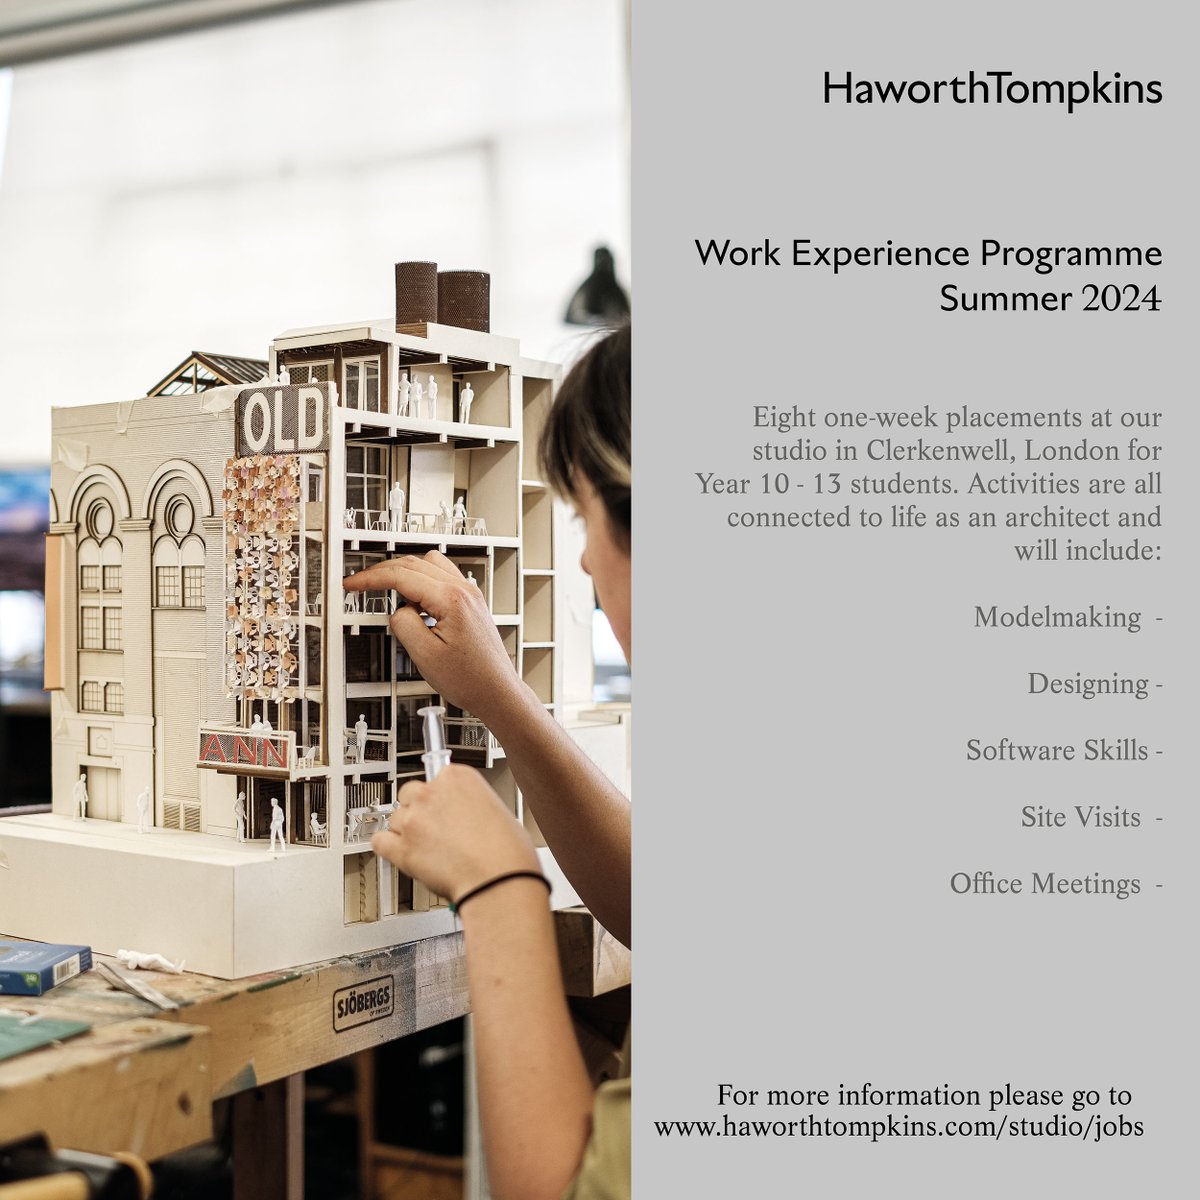 Our summer work experience programme is open for applications from students in year's 10-13 - for more info and to apply - haworthtompkins.com/studio/jobs #haworthtompkins #workexperience #architecture #students #architects #learning #opportunity